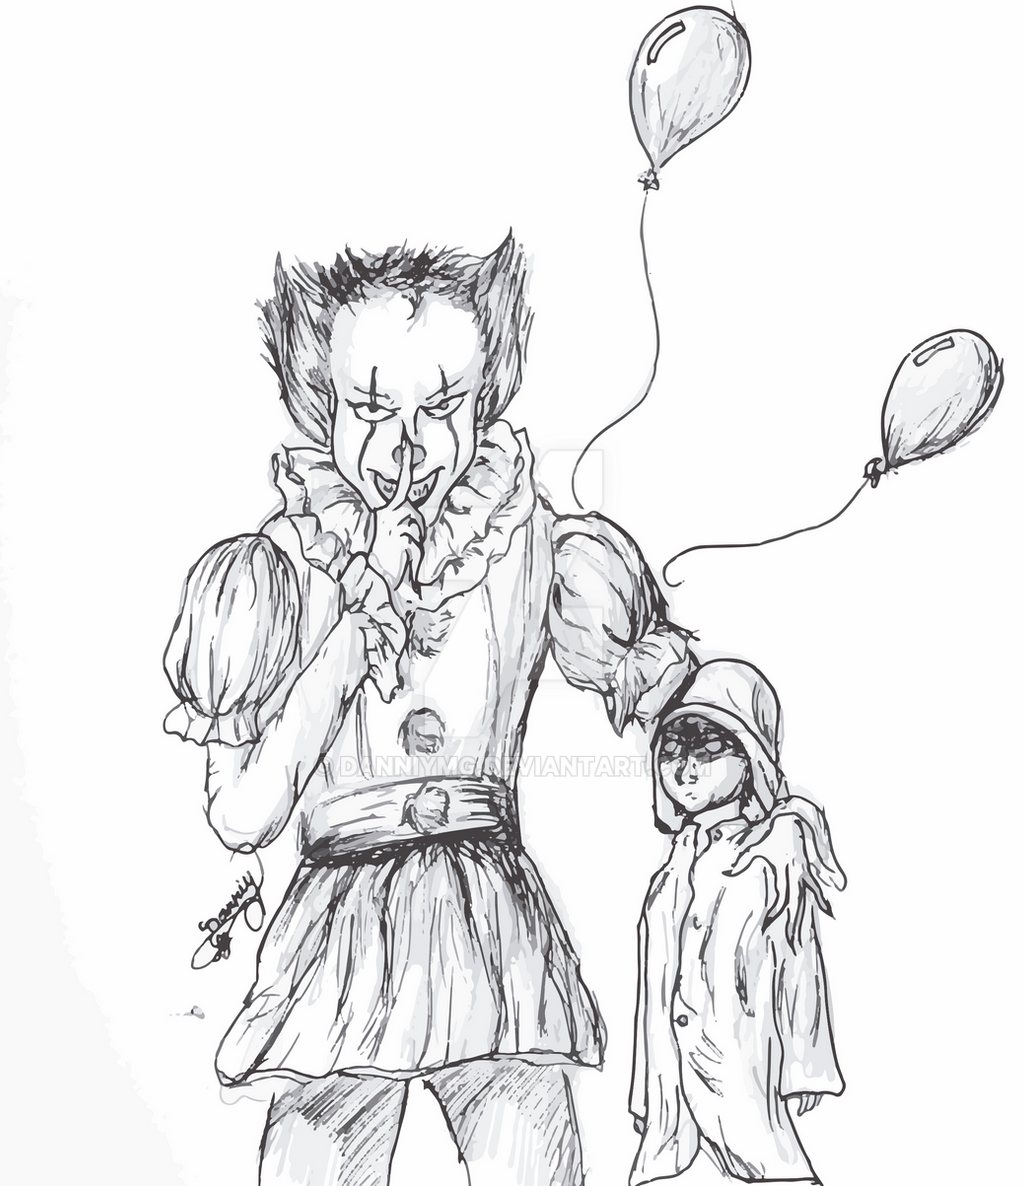 pennywise (dibujo) by DanniyMG on DeviantArt